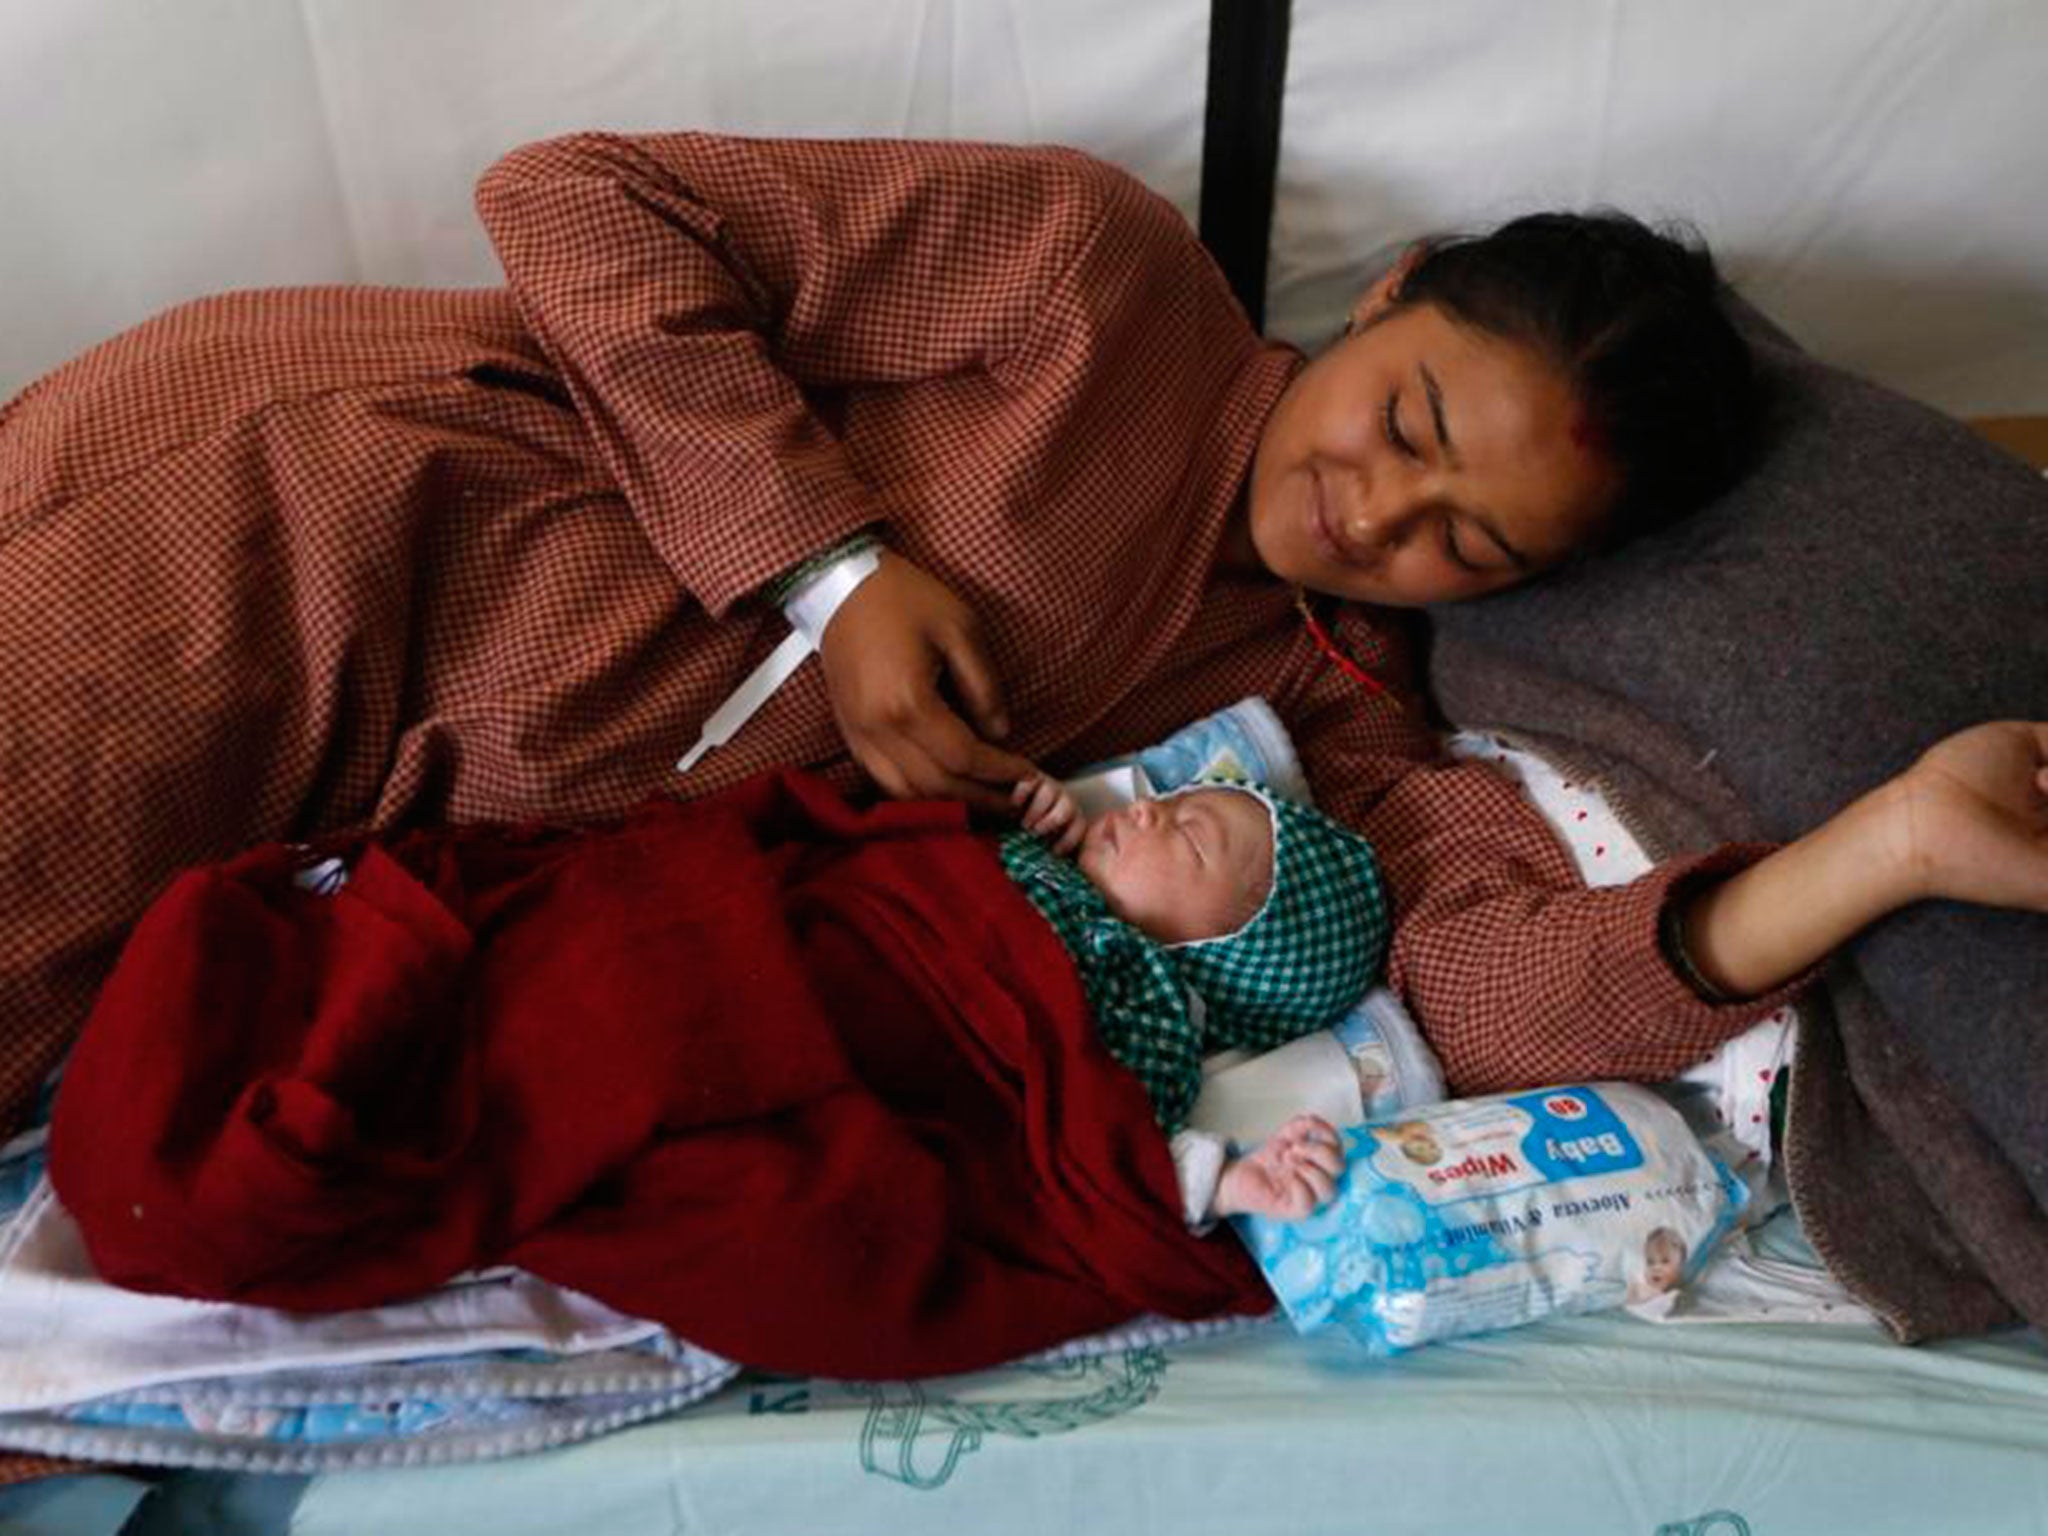 New mother Lata Chand lies with new baby born on Friday (AP)